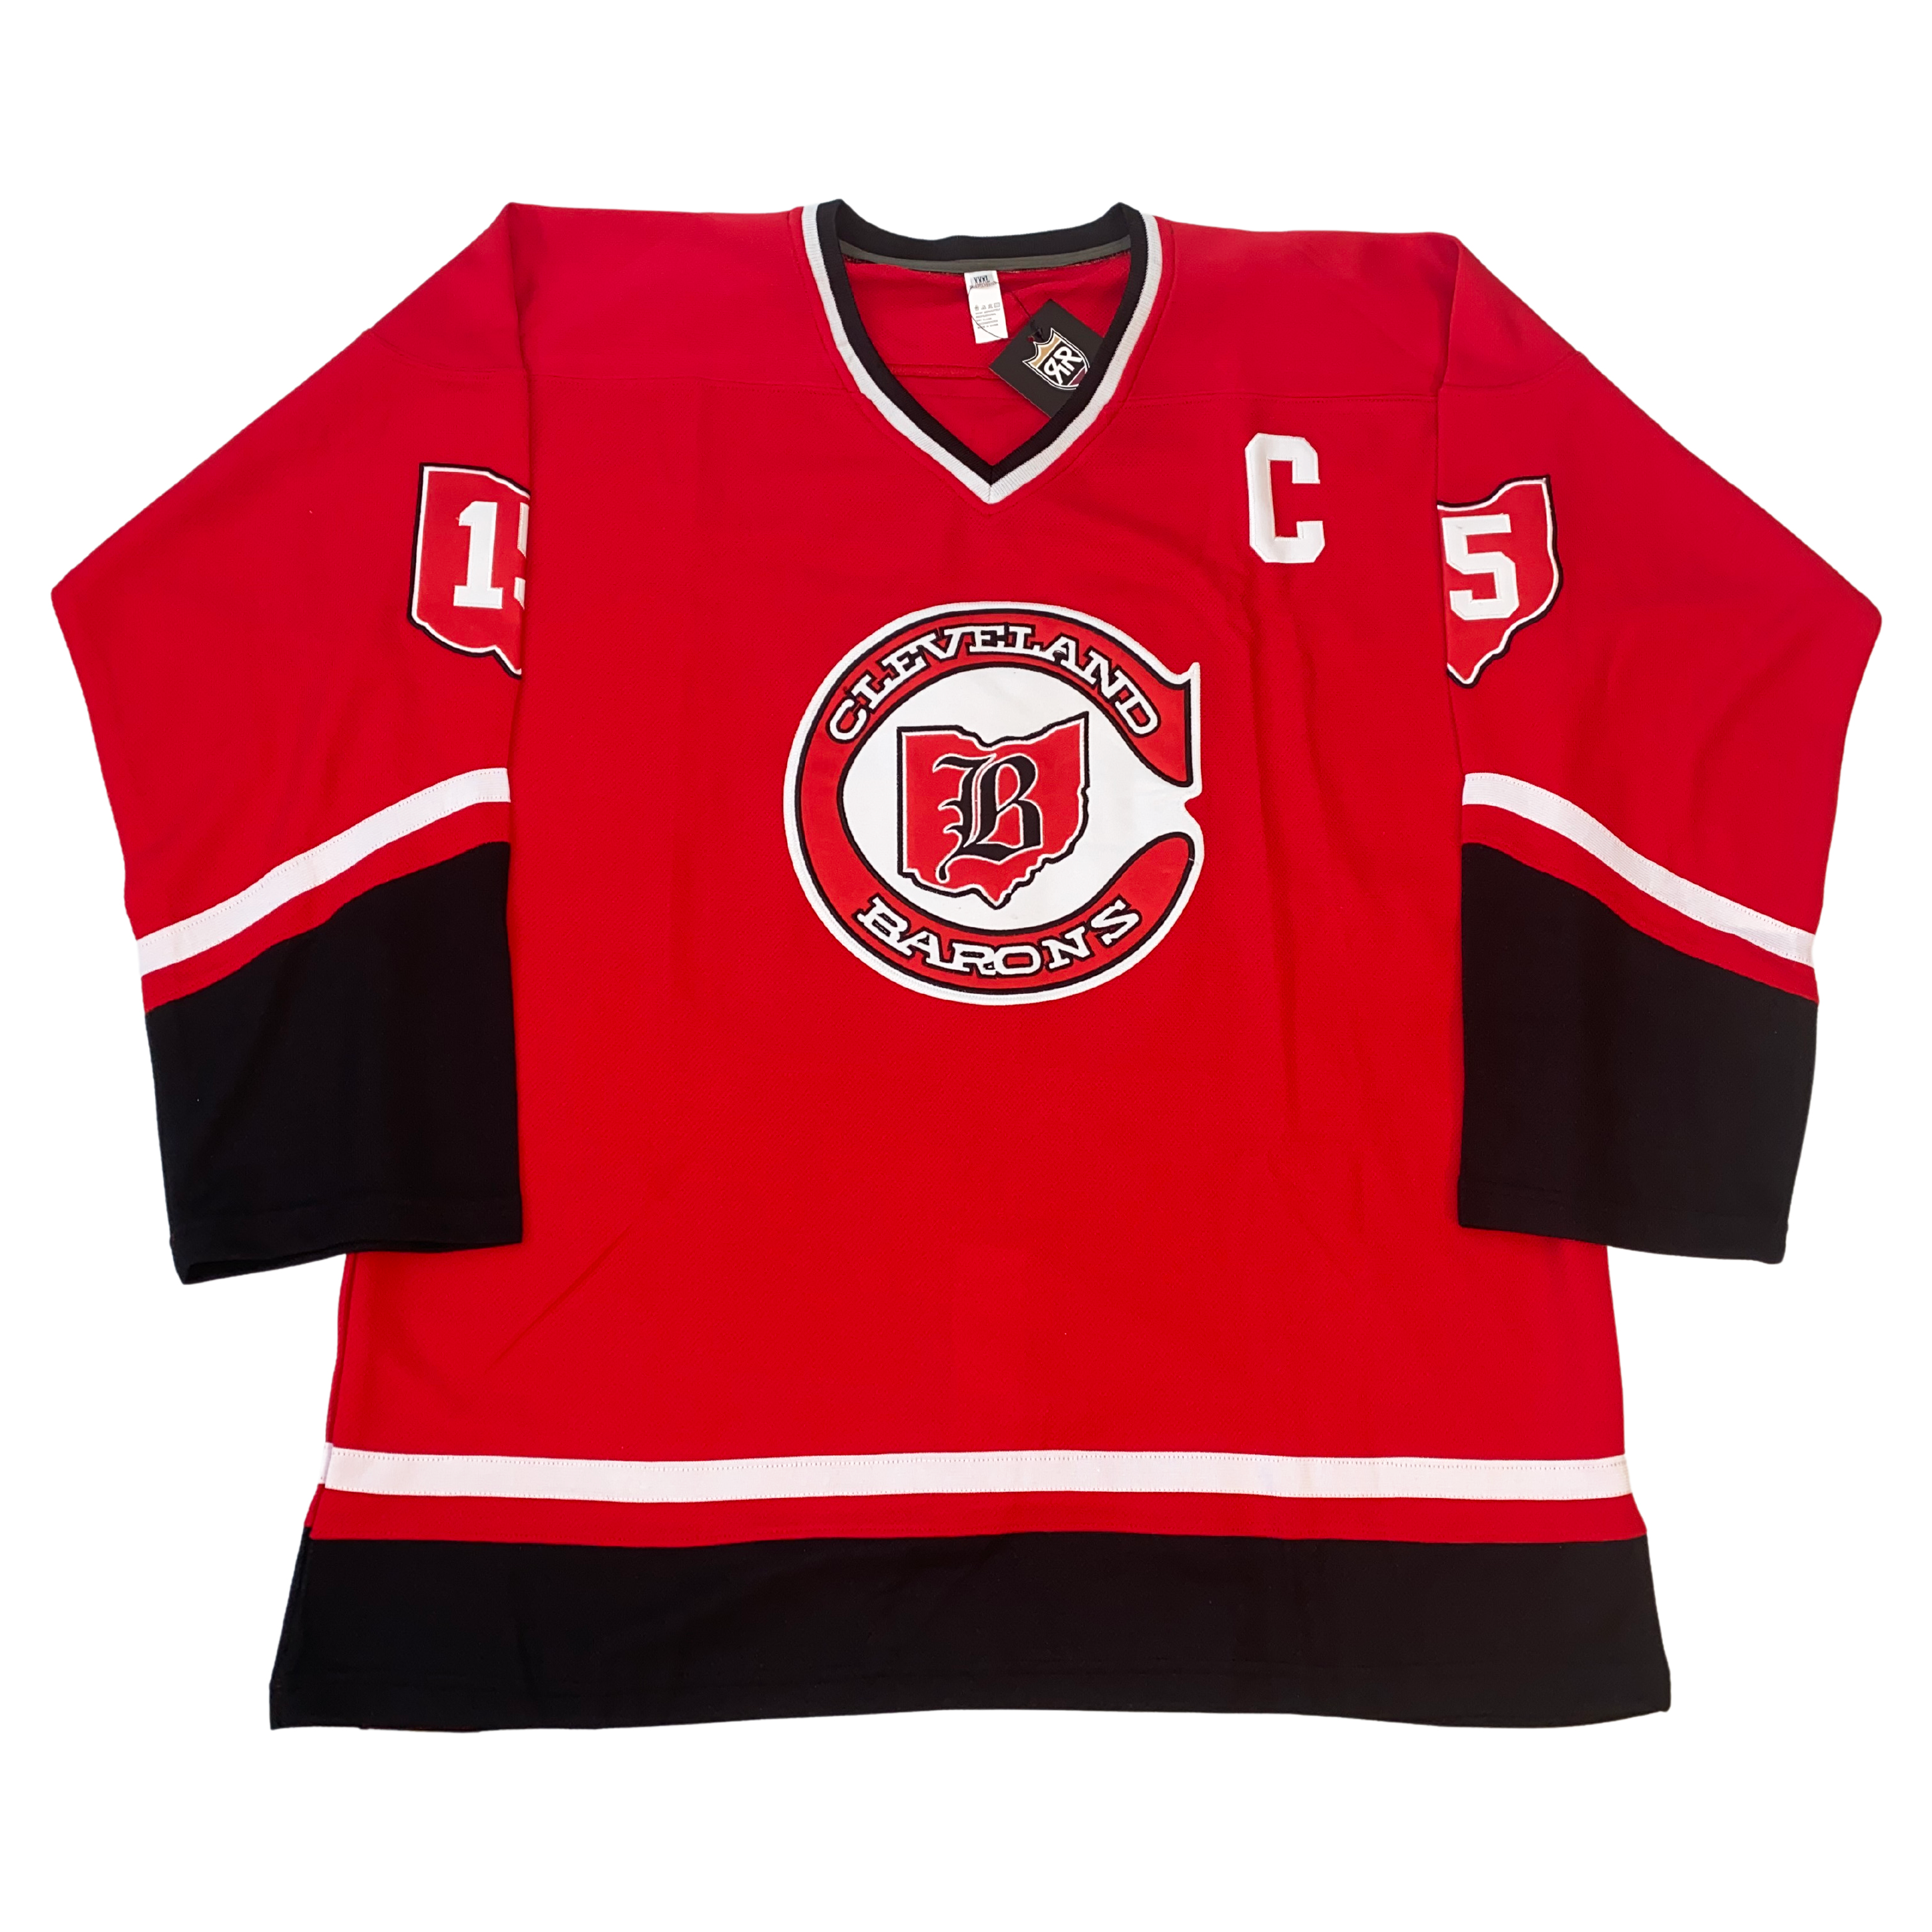 Gilles Meloche 27 Cleveland Barons Hockey Jersey